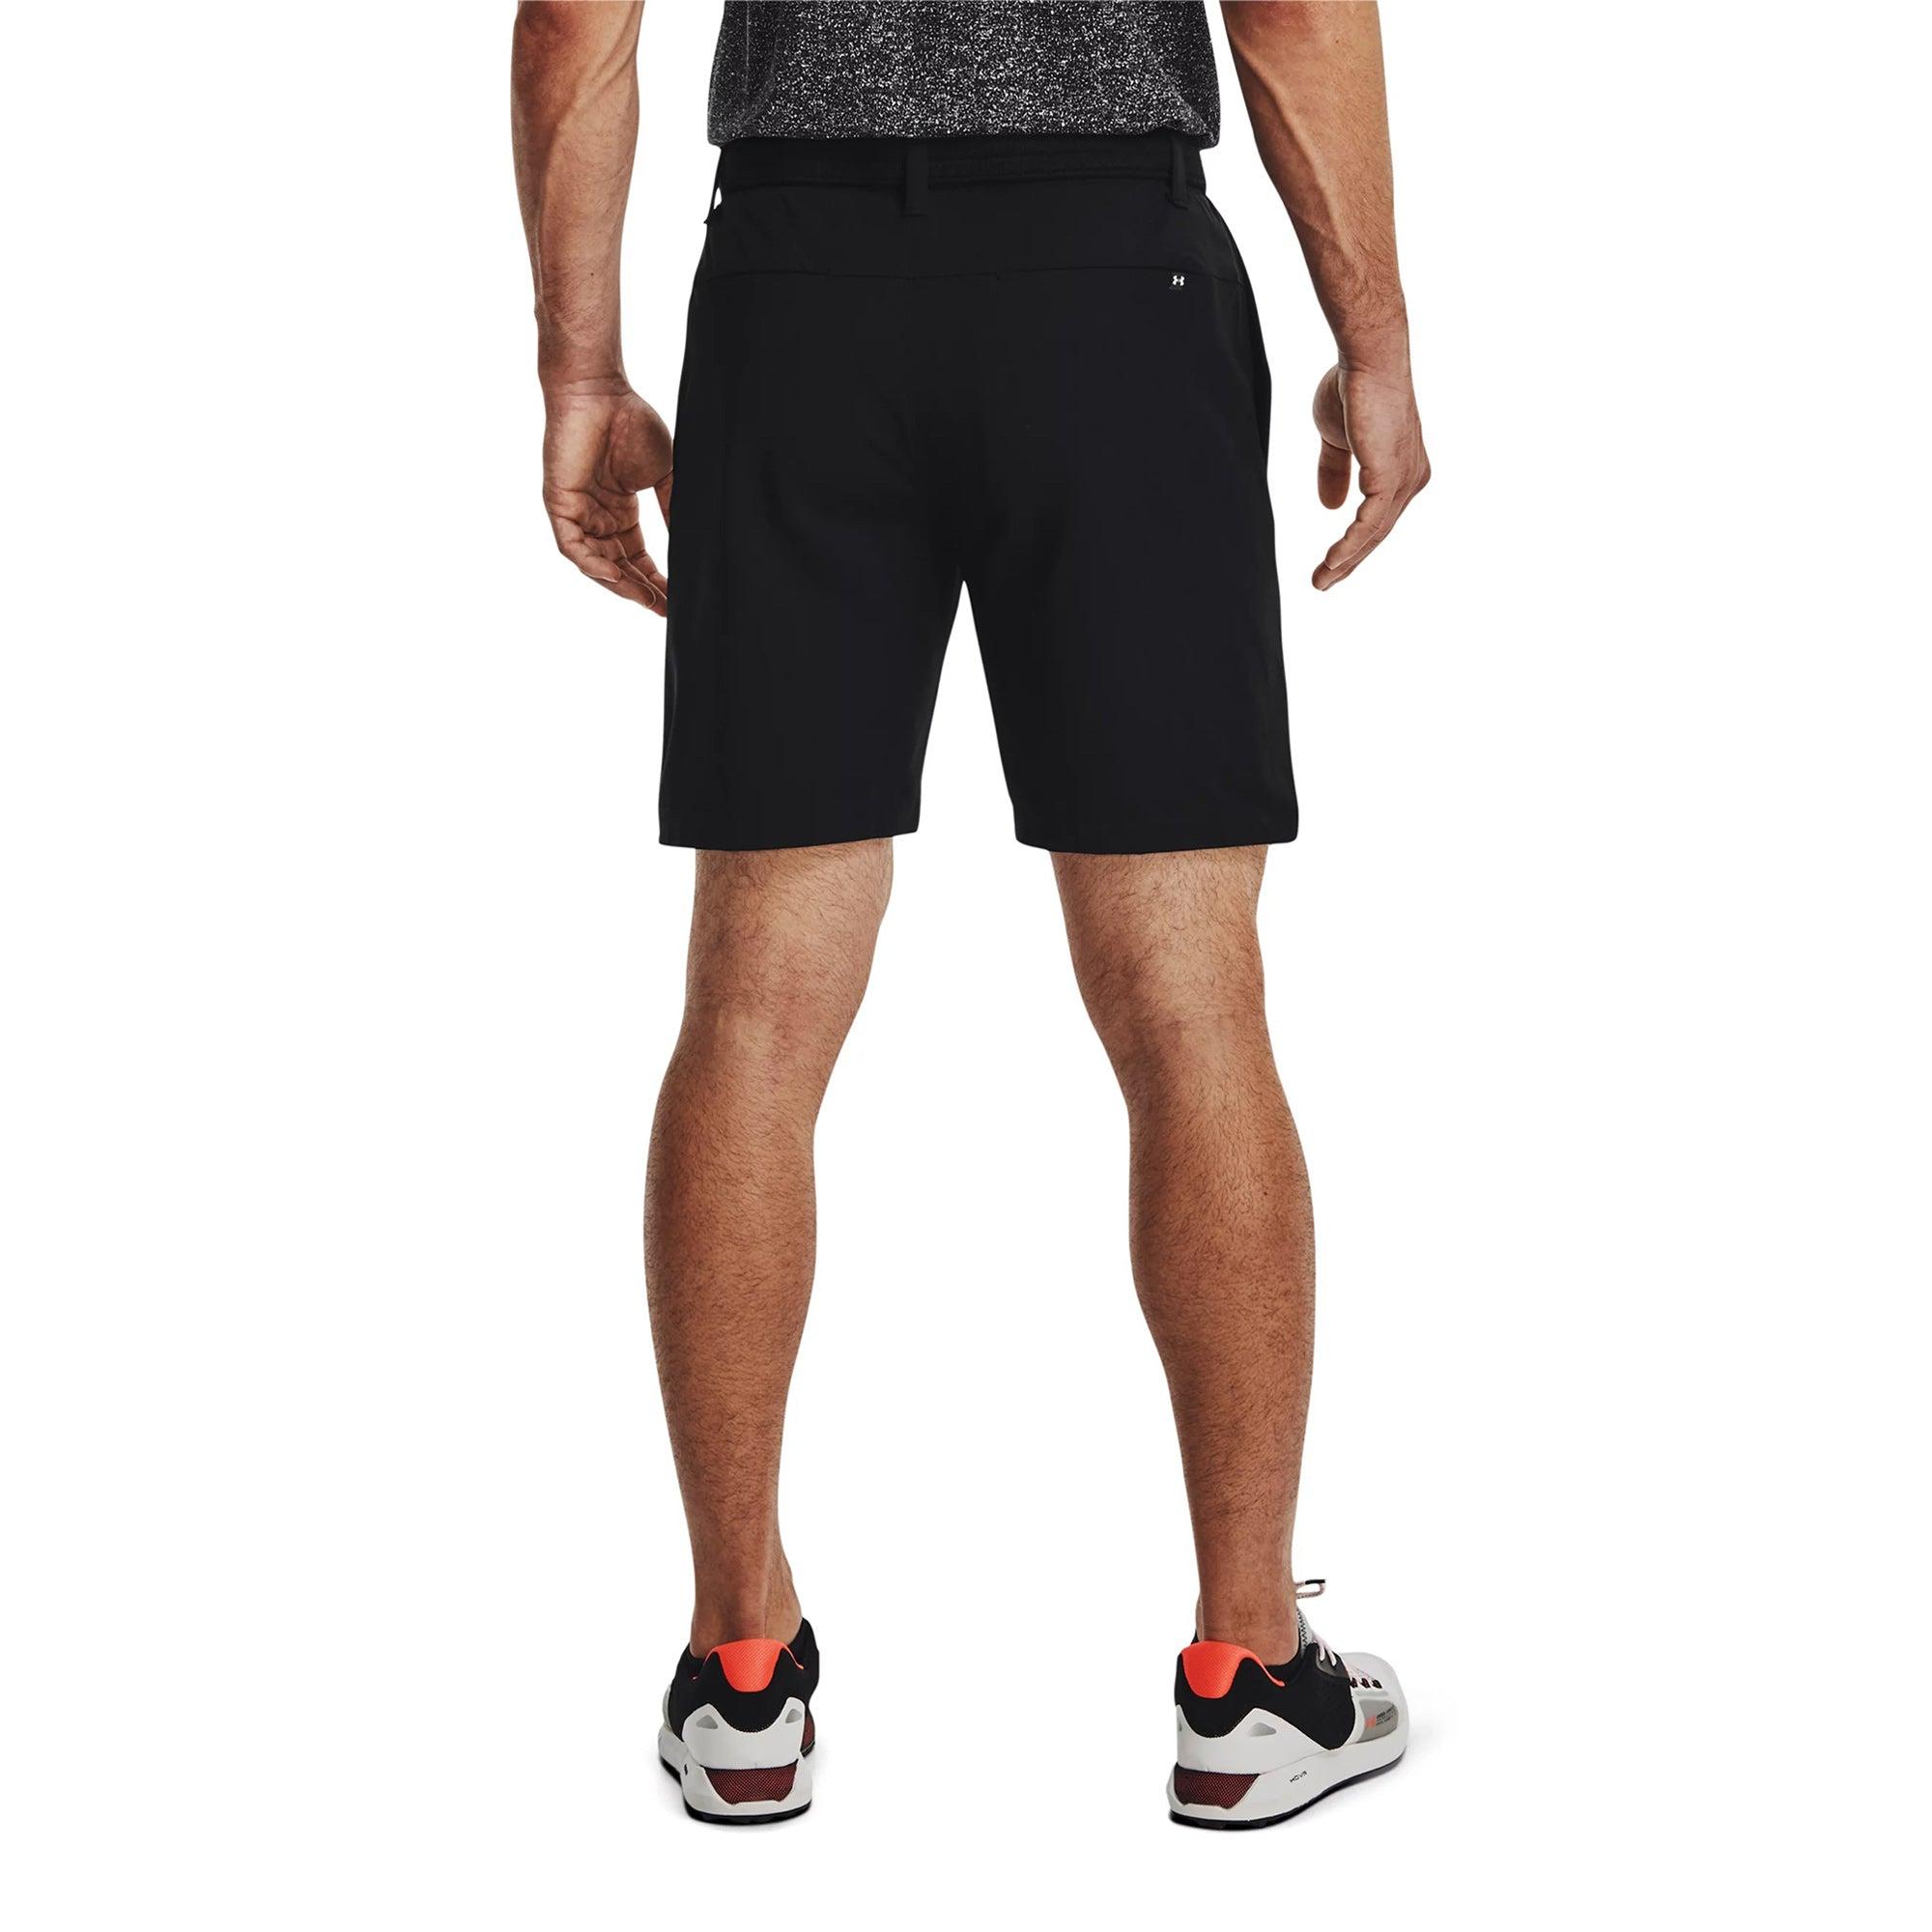 Quần ngắn thể thao nam Under Armour Iso-Chill - 1370083-001